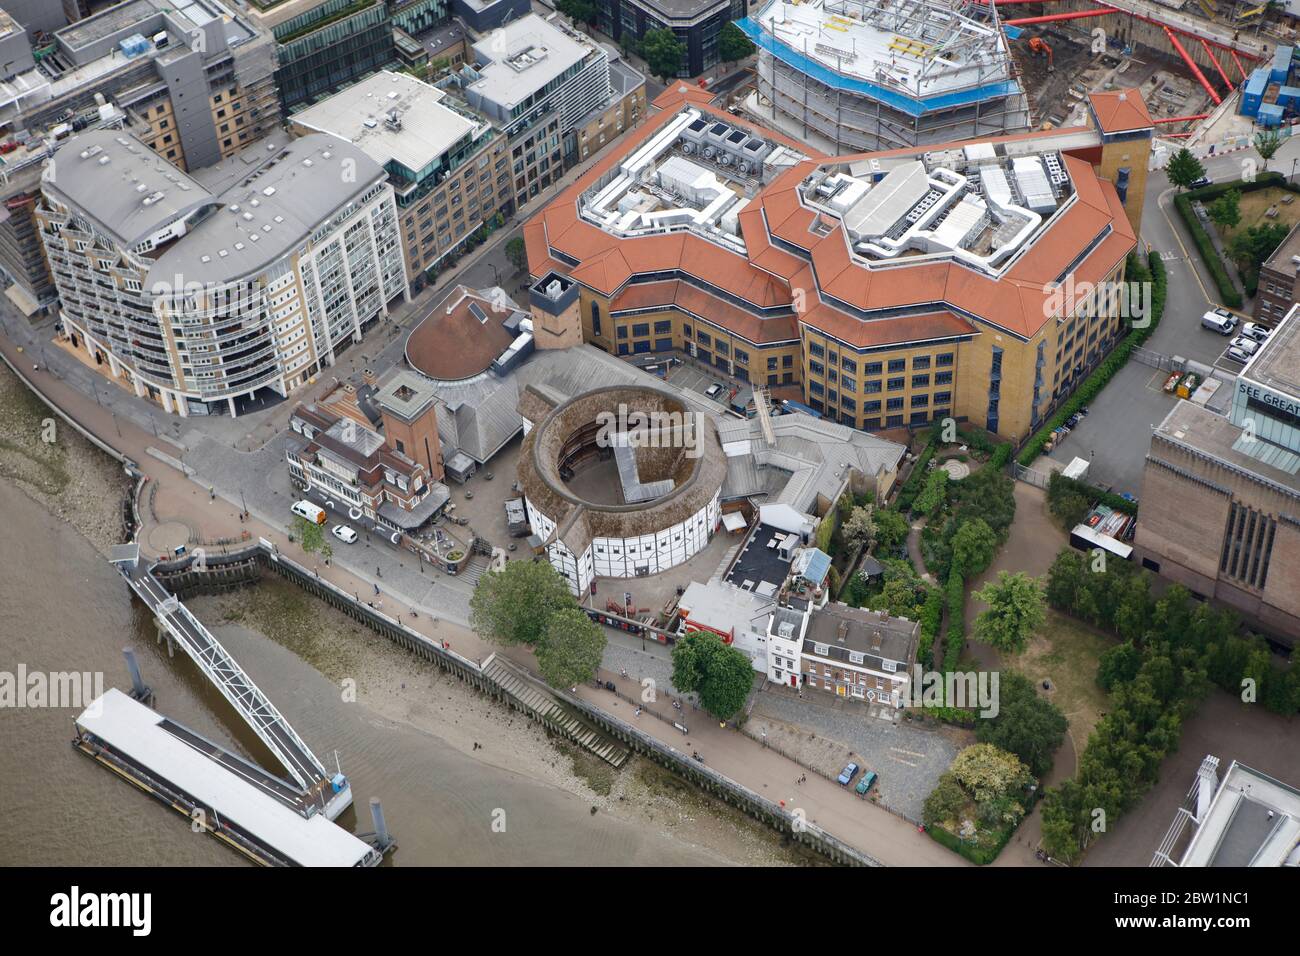 Aerial View of Shakepeare's Globe Theatre, London, UK Stock Photo